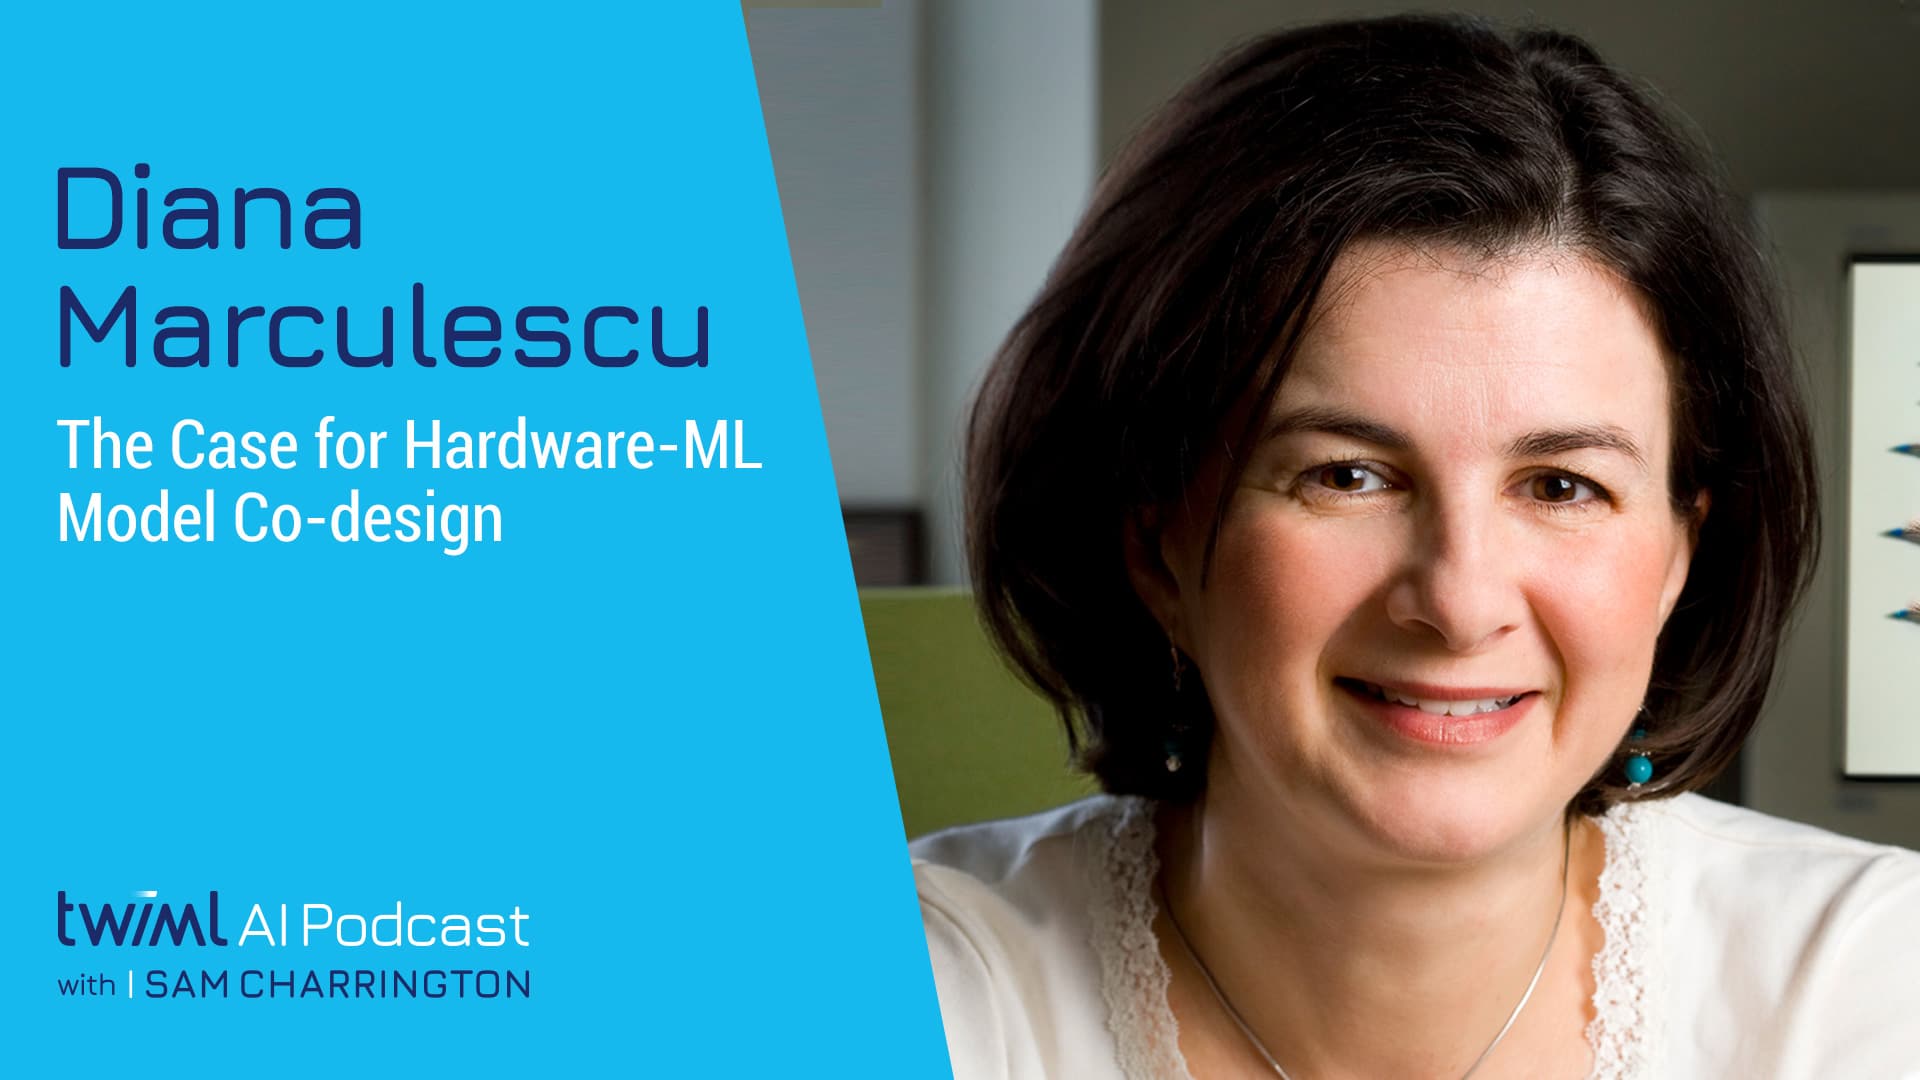 Banner Image: Diana Marculescu - Podcast Interview